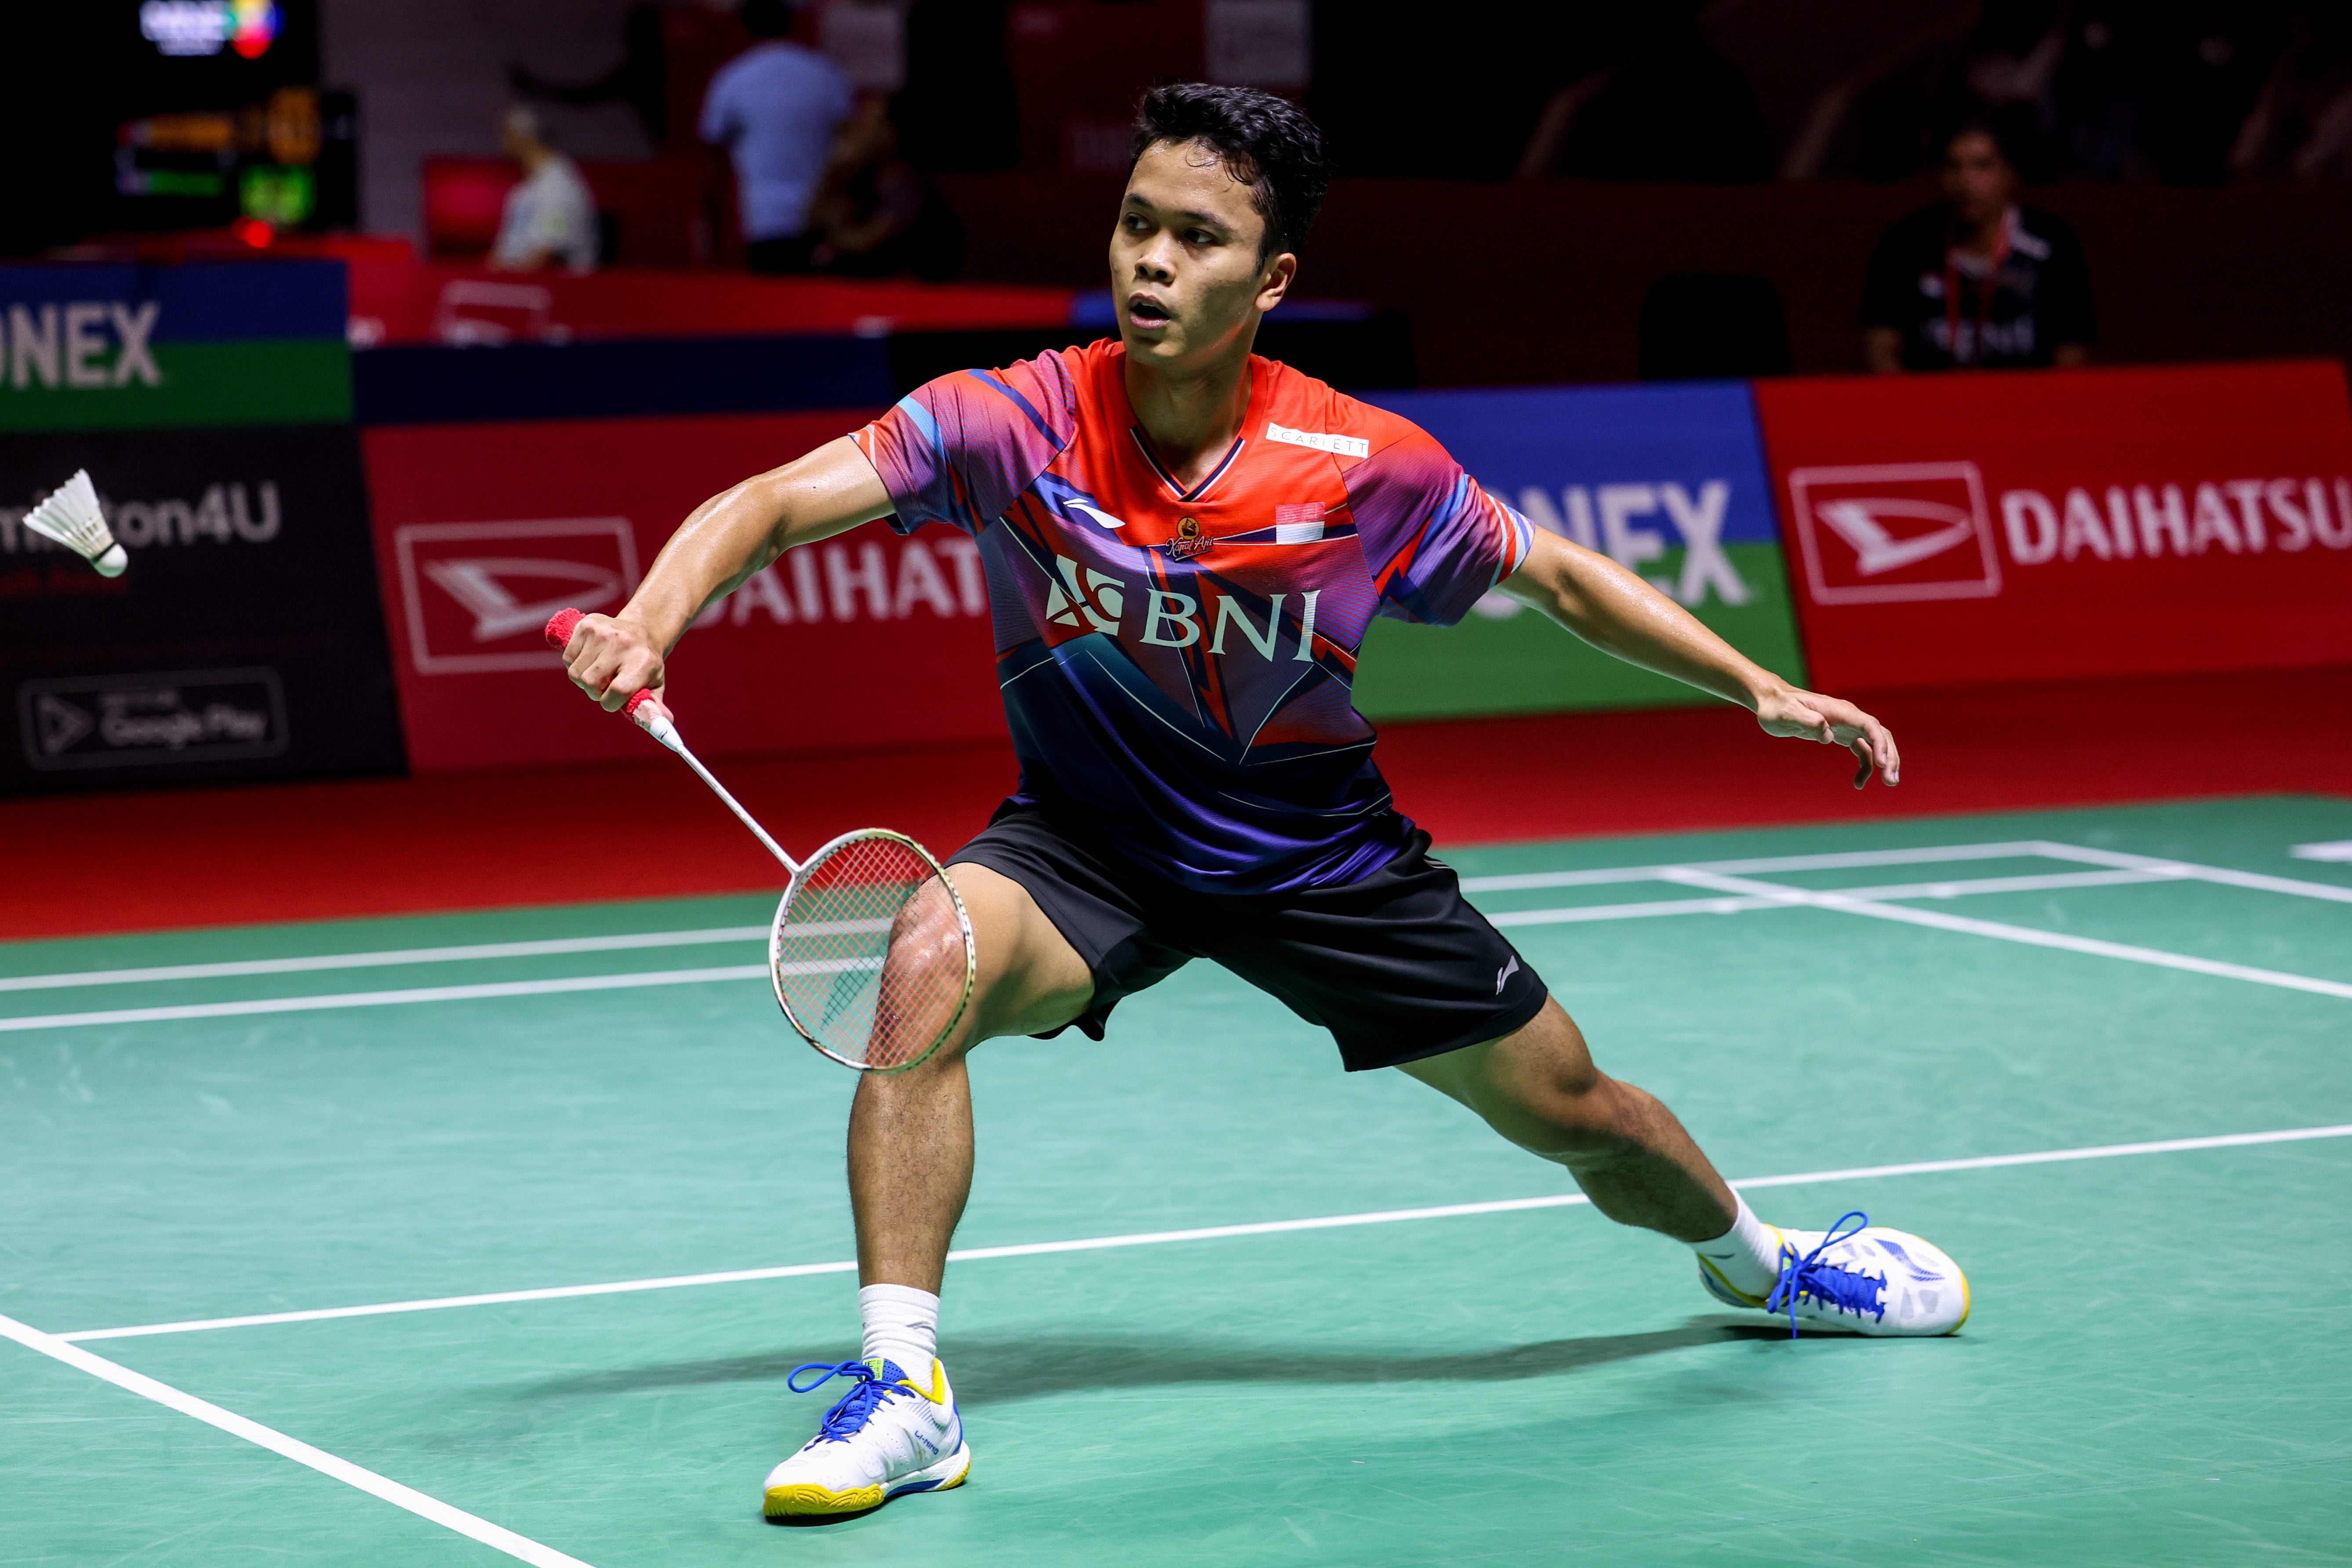 Defending Champions Returning to Compete at Singapore Badminton Open 2023!